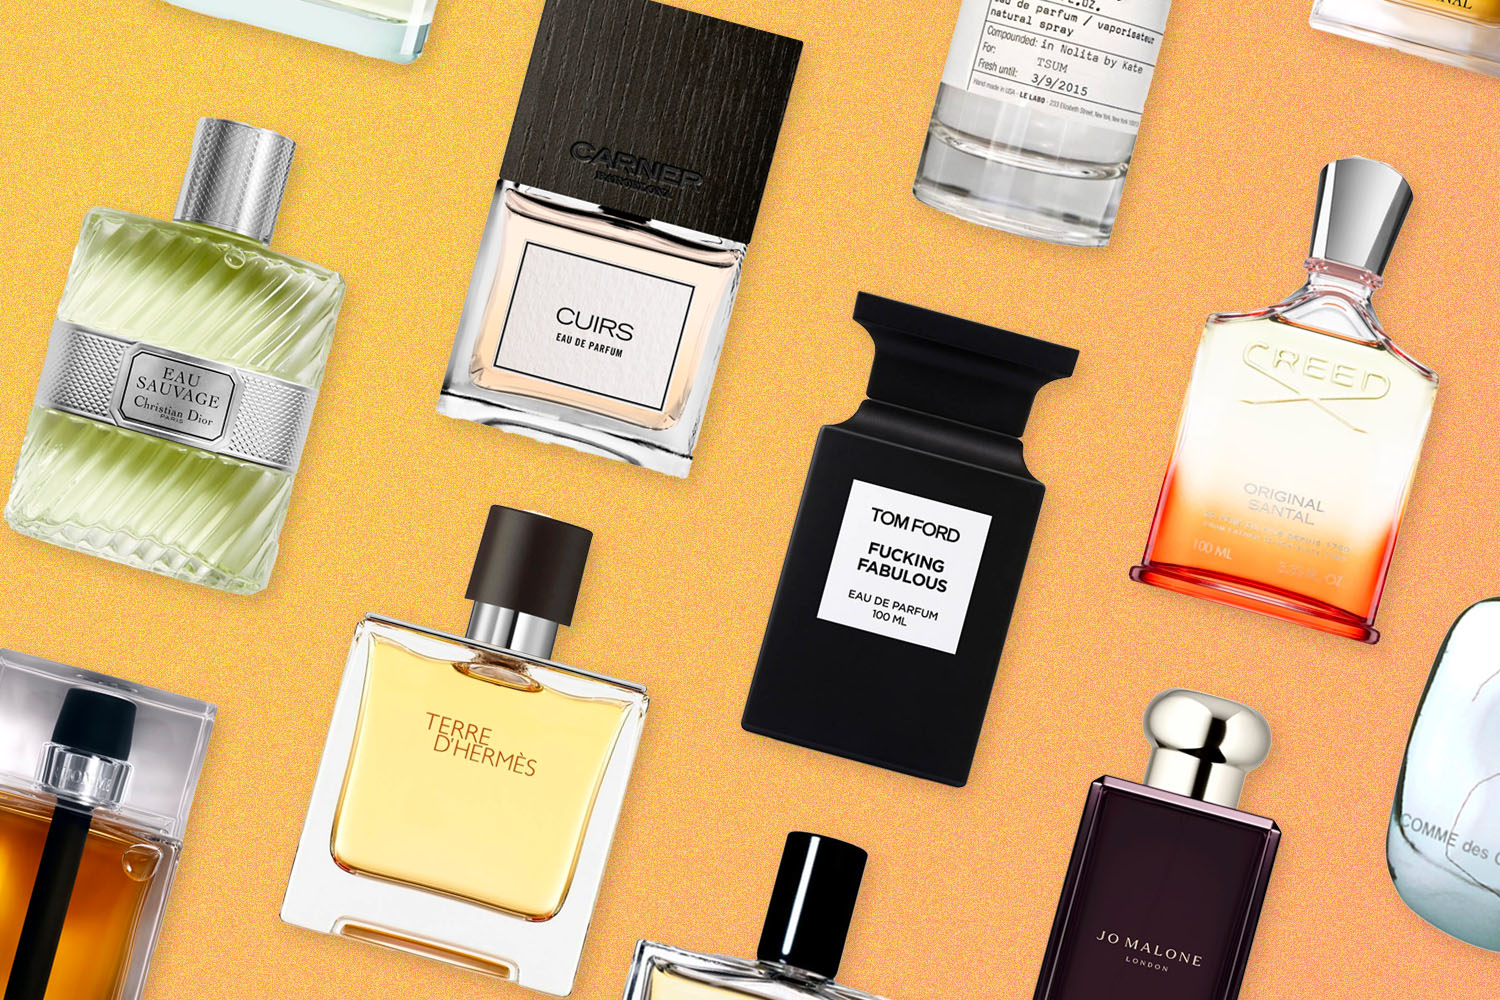 9 Luxurious Men's Fragrances To Turn Up The Charm